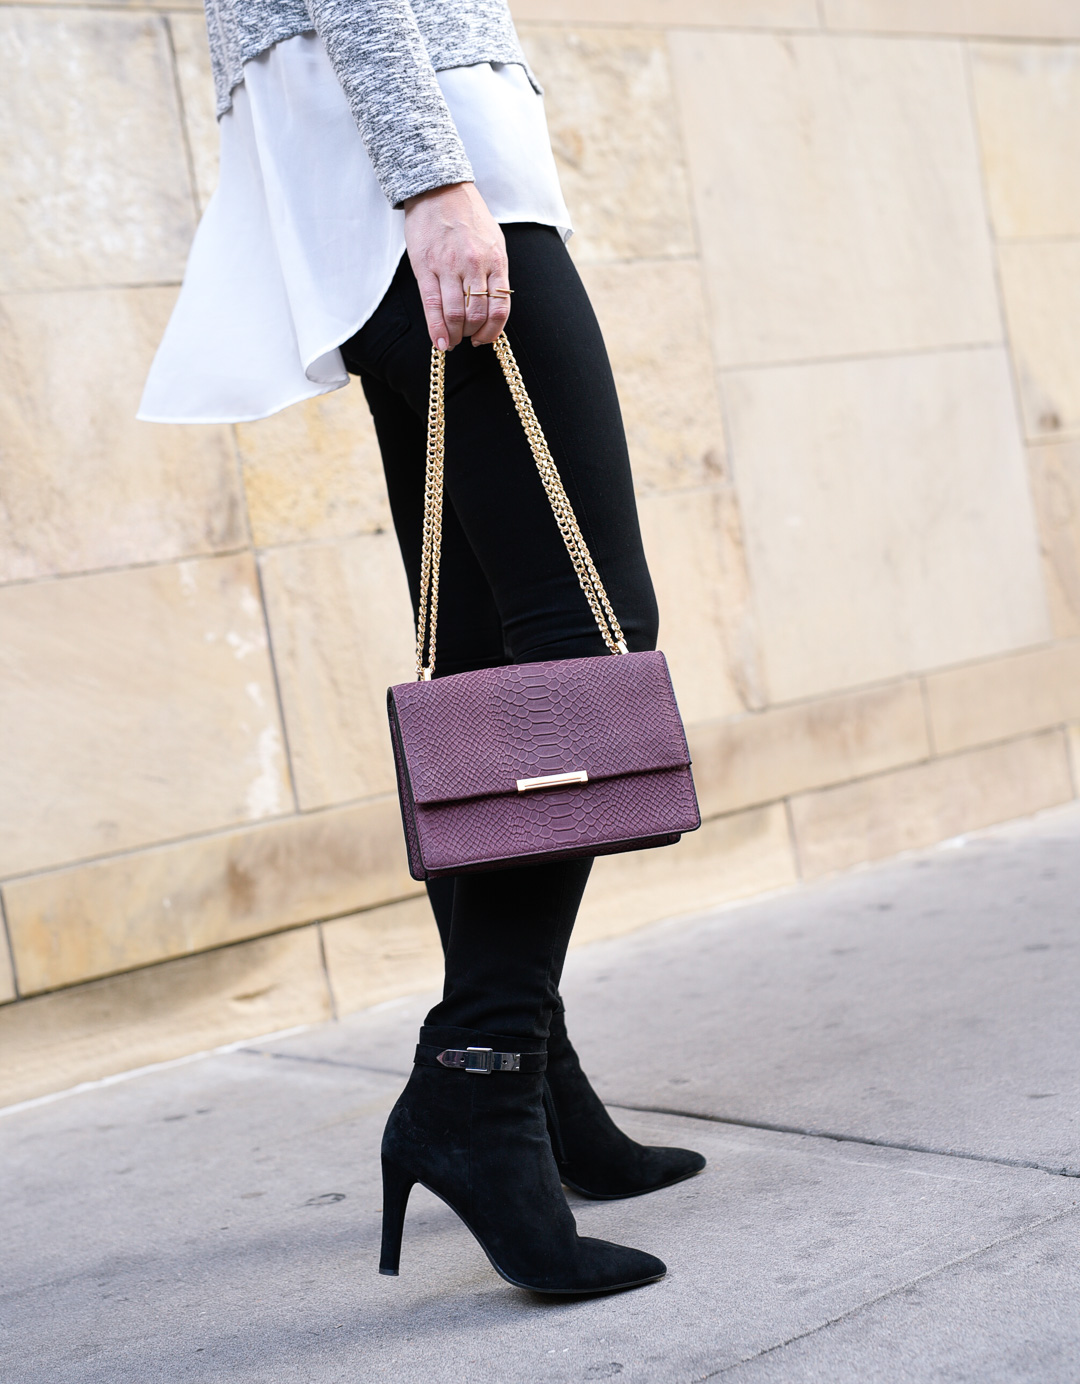 Burgundy bags are the perfect fall accessory!